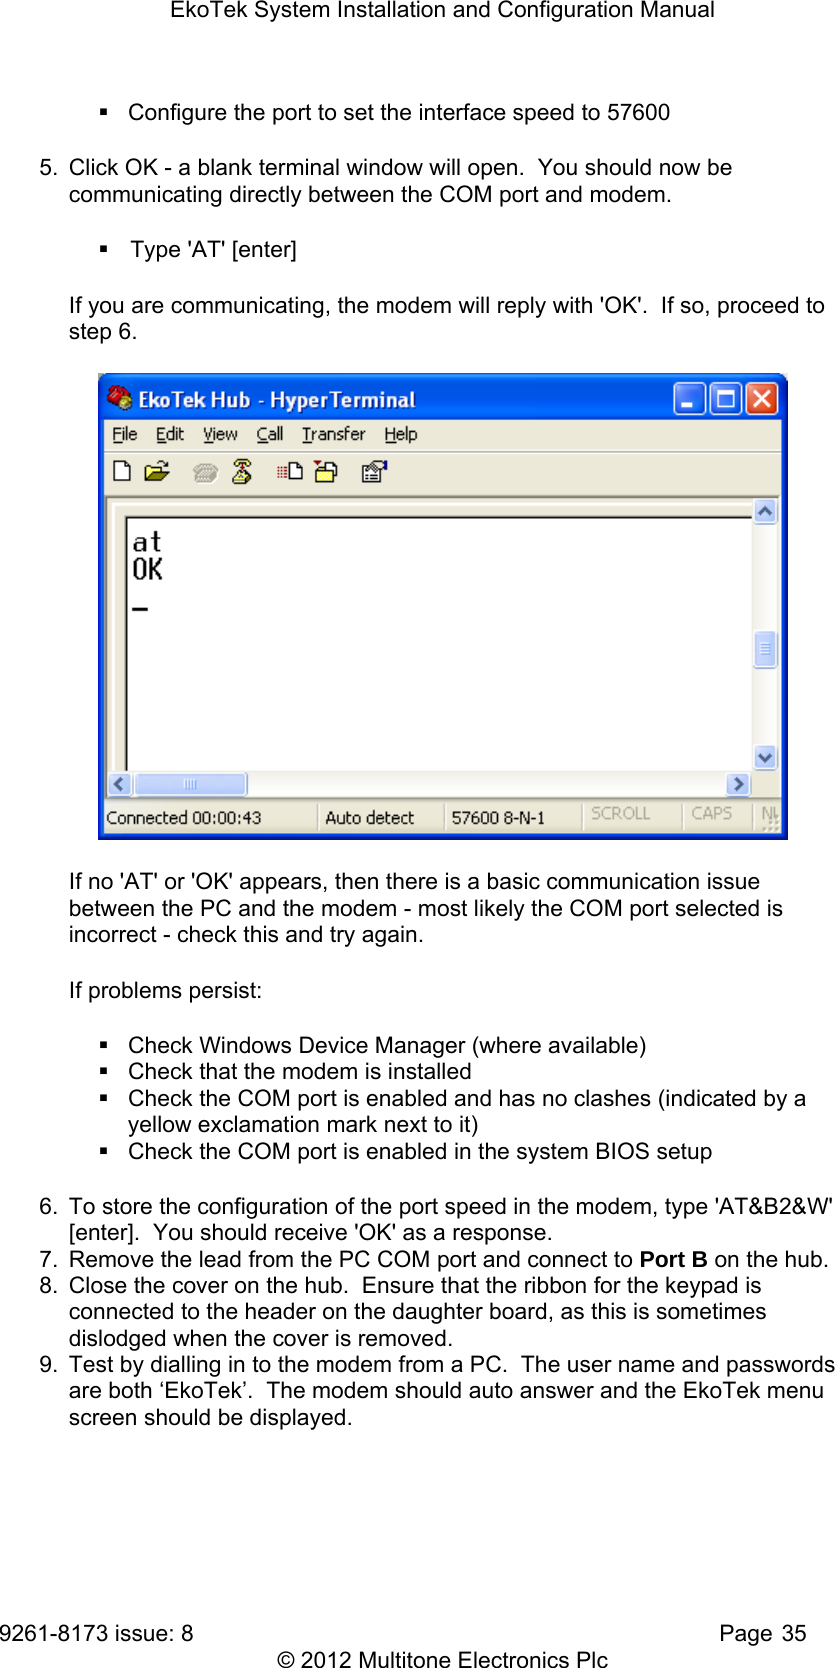 EkoTek System Installation and Configuration Manual 9261-8173 issue: 8   Page 35 © 2012 Multitone Electronics Plc   Configure the port to set the interface speed to 57600 5.  Click OK - a blank terminal window will open.  You should now be communicating directly between the COM port and modem.     Type &apos;AT&apos; [enter] If you are communicating, the modem will reply with &apos;OK&apos;.  If so, proceed to step 6.  If no &apos;AT&apos; or &apos;OK&apos; appears, then there is a basic communication issue between the PC and the modem - most likely the COM port selected is incorrect - check this and try again. If problems persist:   Check Windows Device Manager (where available)   Check that the modem is installed   Check the COM port is enabled and has no clashes (indicated by a yellow exclamation mark next to it)   Check the COM port is enabled in the system BIOS setup 6.  To store the configuration of the port speed in the modem, type &apos;AT&amp;B2&amp;W&apos; [enter].  You should receive &apos;OK&apos; as a response. 7.  Remove the lead from the PC COM port and connect to Port B on the hub. 8.  Close the cover on the hub.  Ensure that the ribbon for the keypad is connected to the header on the daughter board, as this is sometimes dislodged when the cover is removed. 9.  Test by dialling in to the modem from a PC.  The user name and passwords are both ‘EkoTek’.  The modem should auto answer and the EkoTek menu screen should be displayed. 